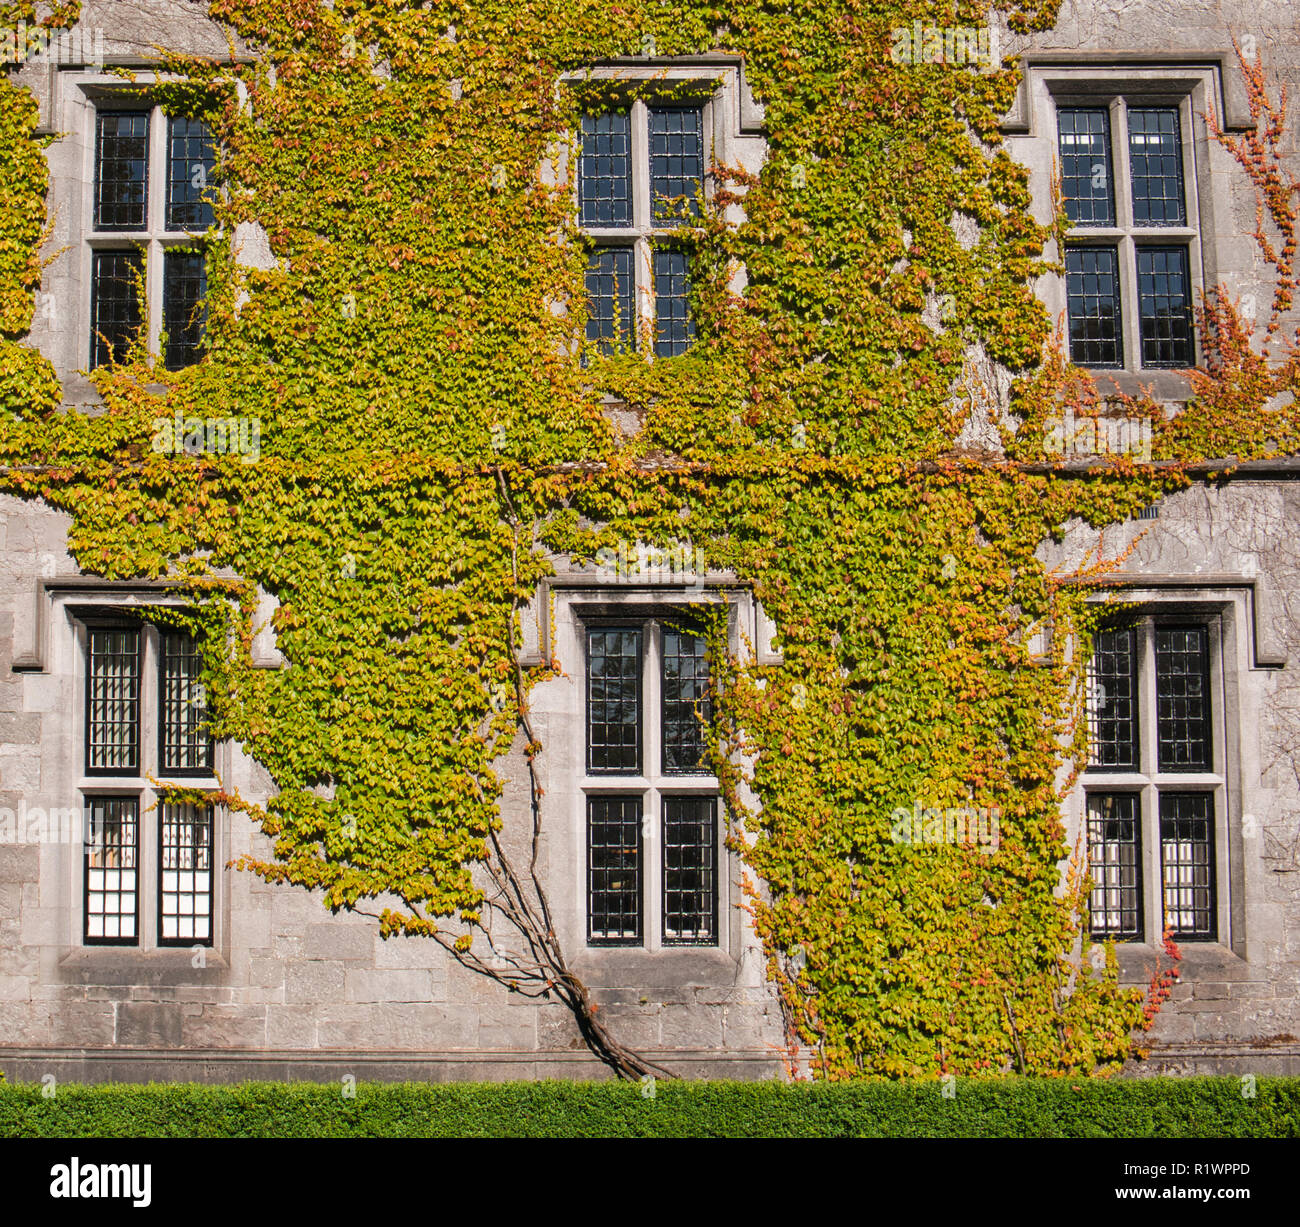 A facade of an old house with climbing plants and six windows Stock Photo -  Alamy